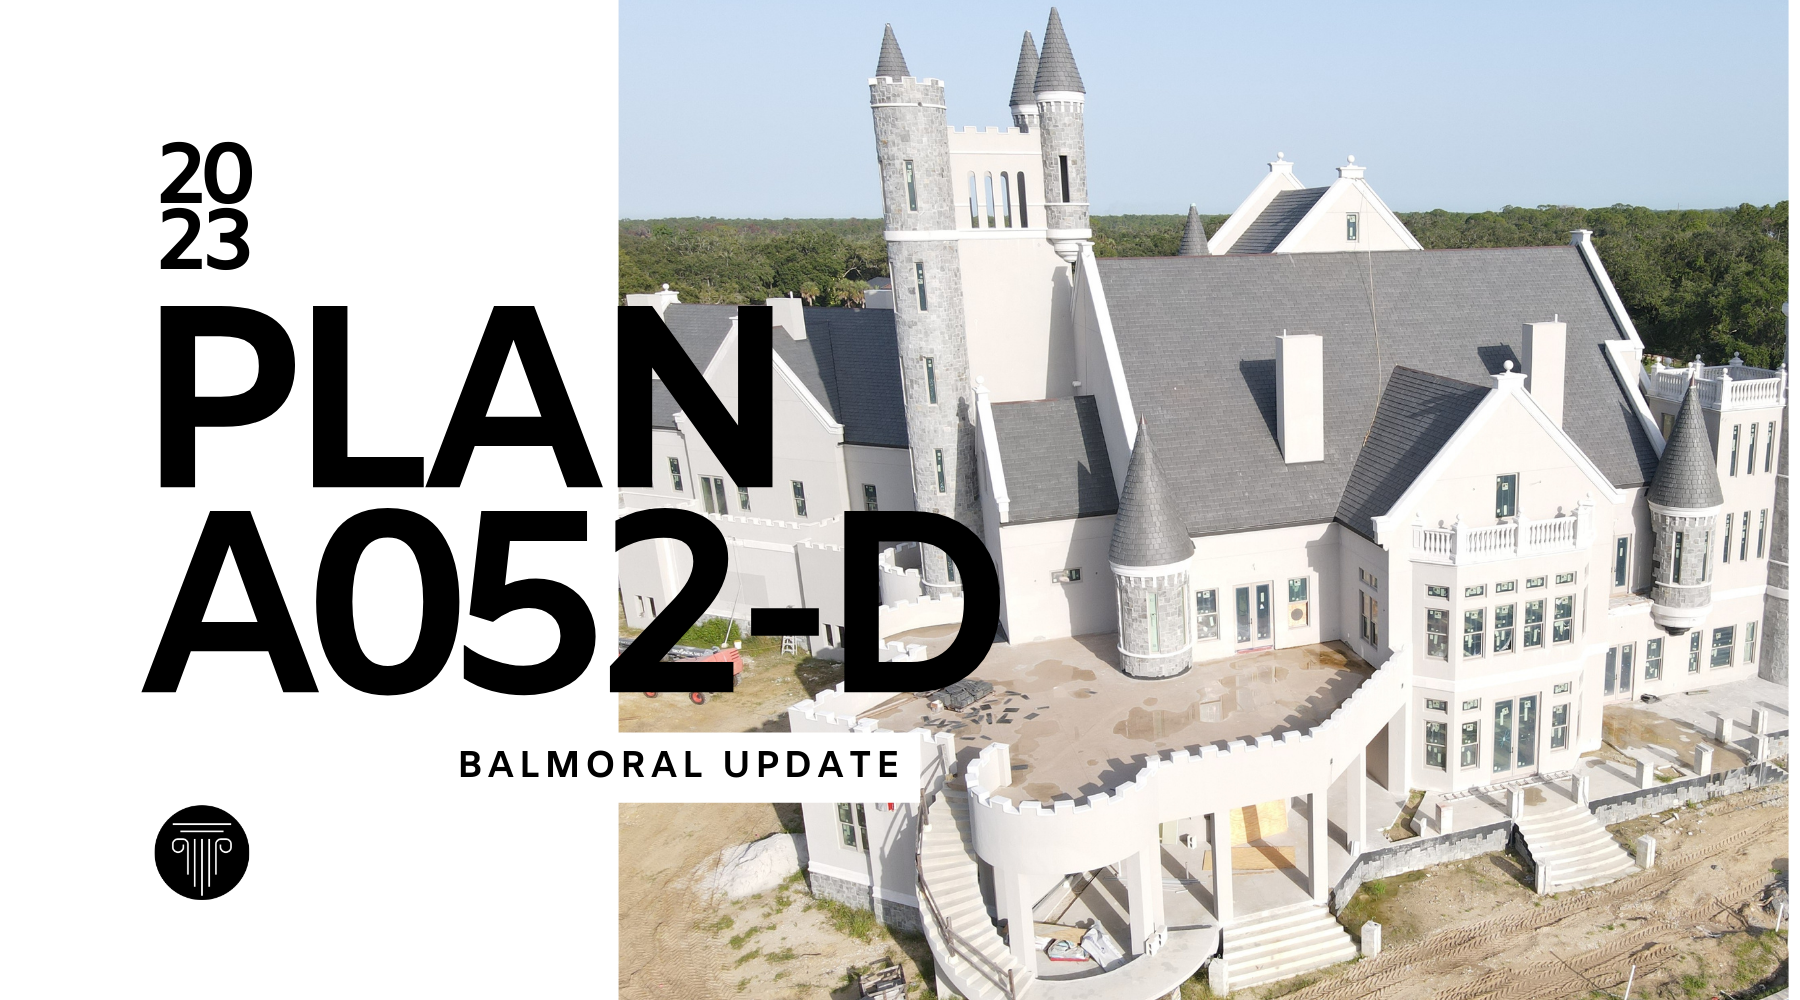 Construction Update: The Balmoral in 2023